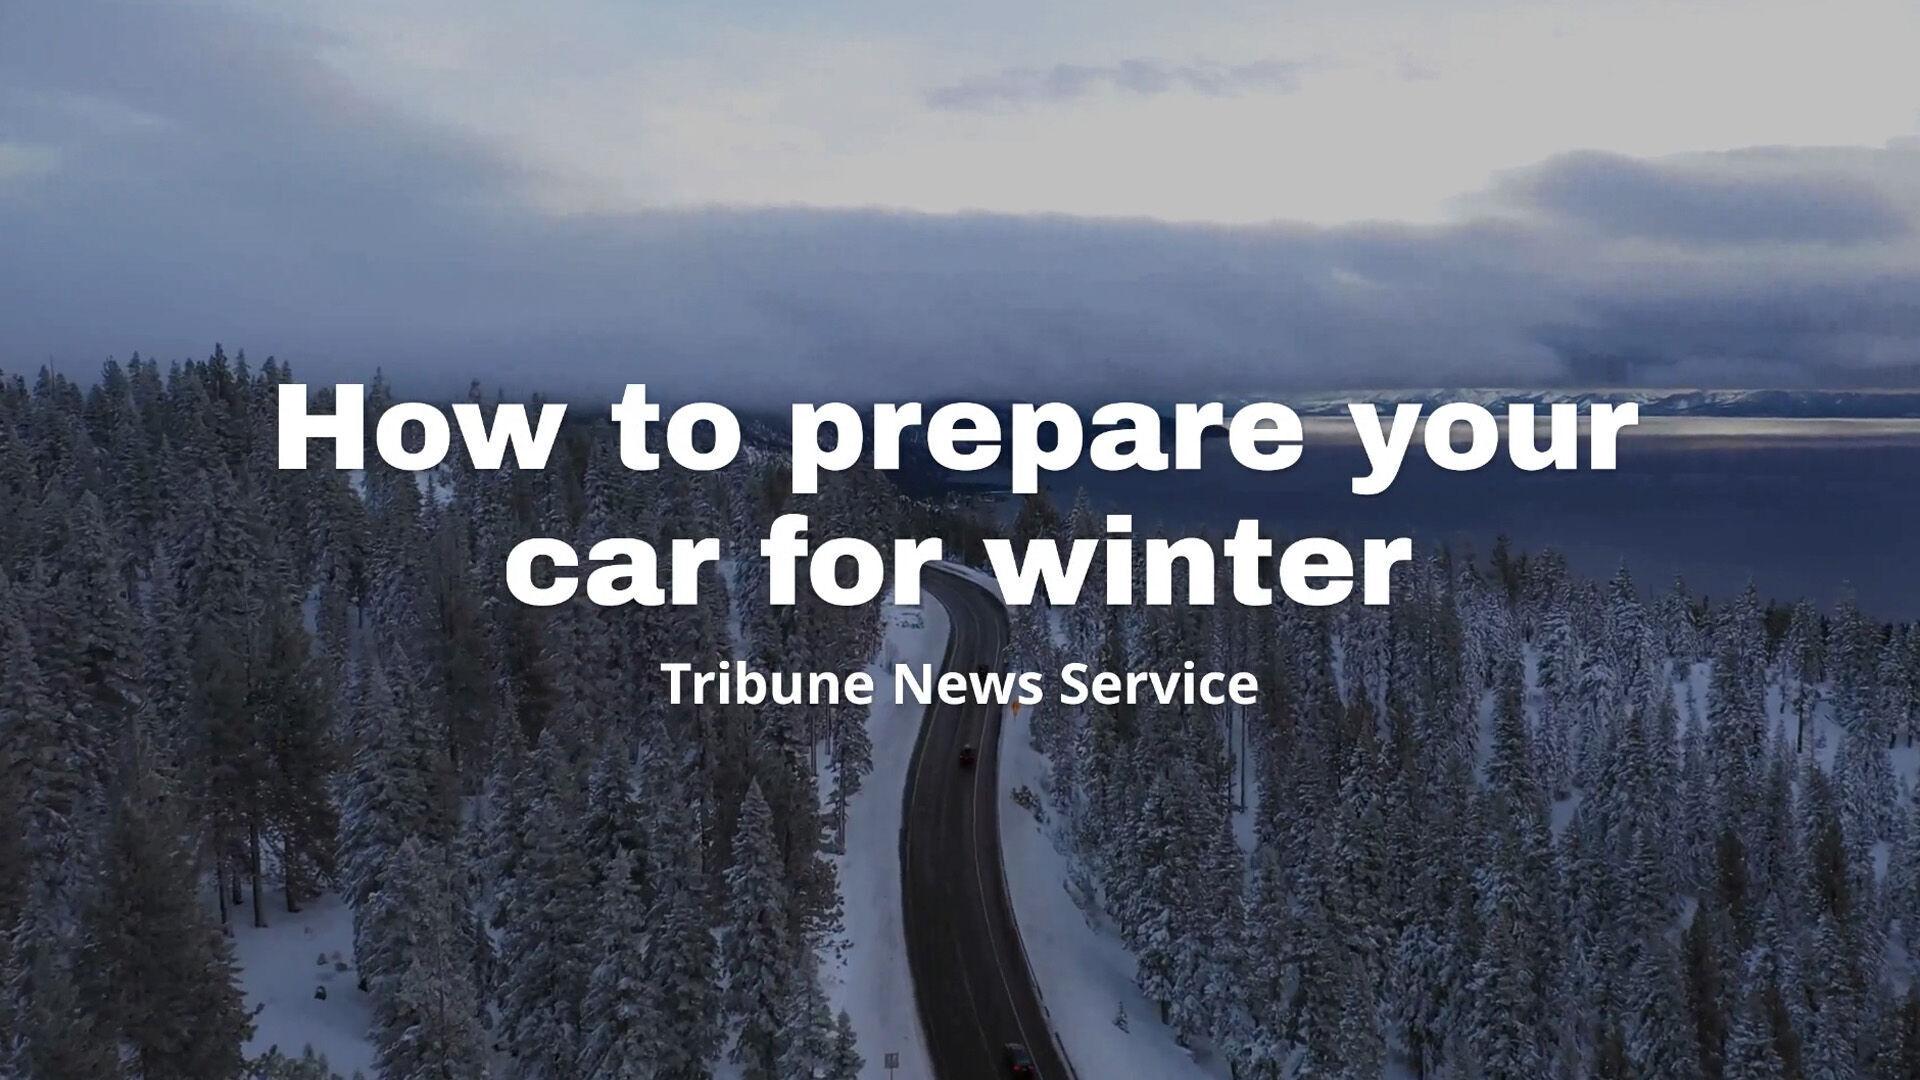 7 Tips to Prepare Your Car for Winter Driving